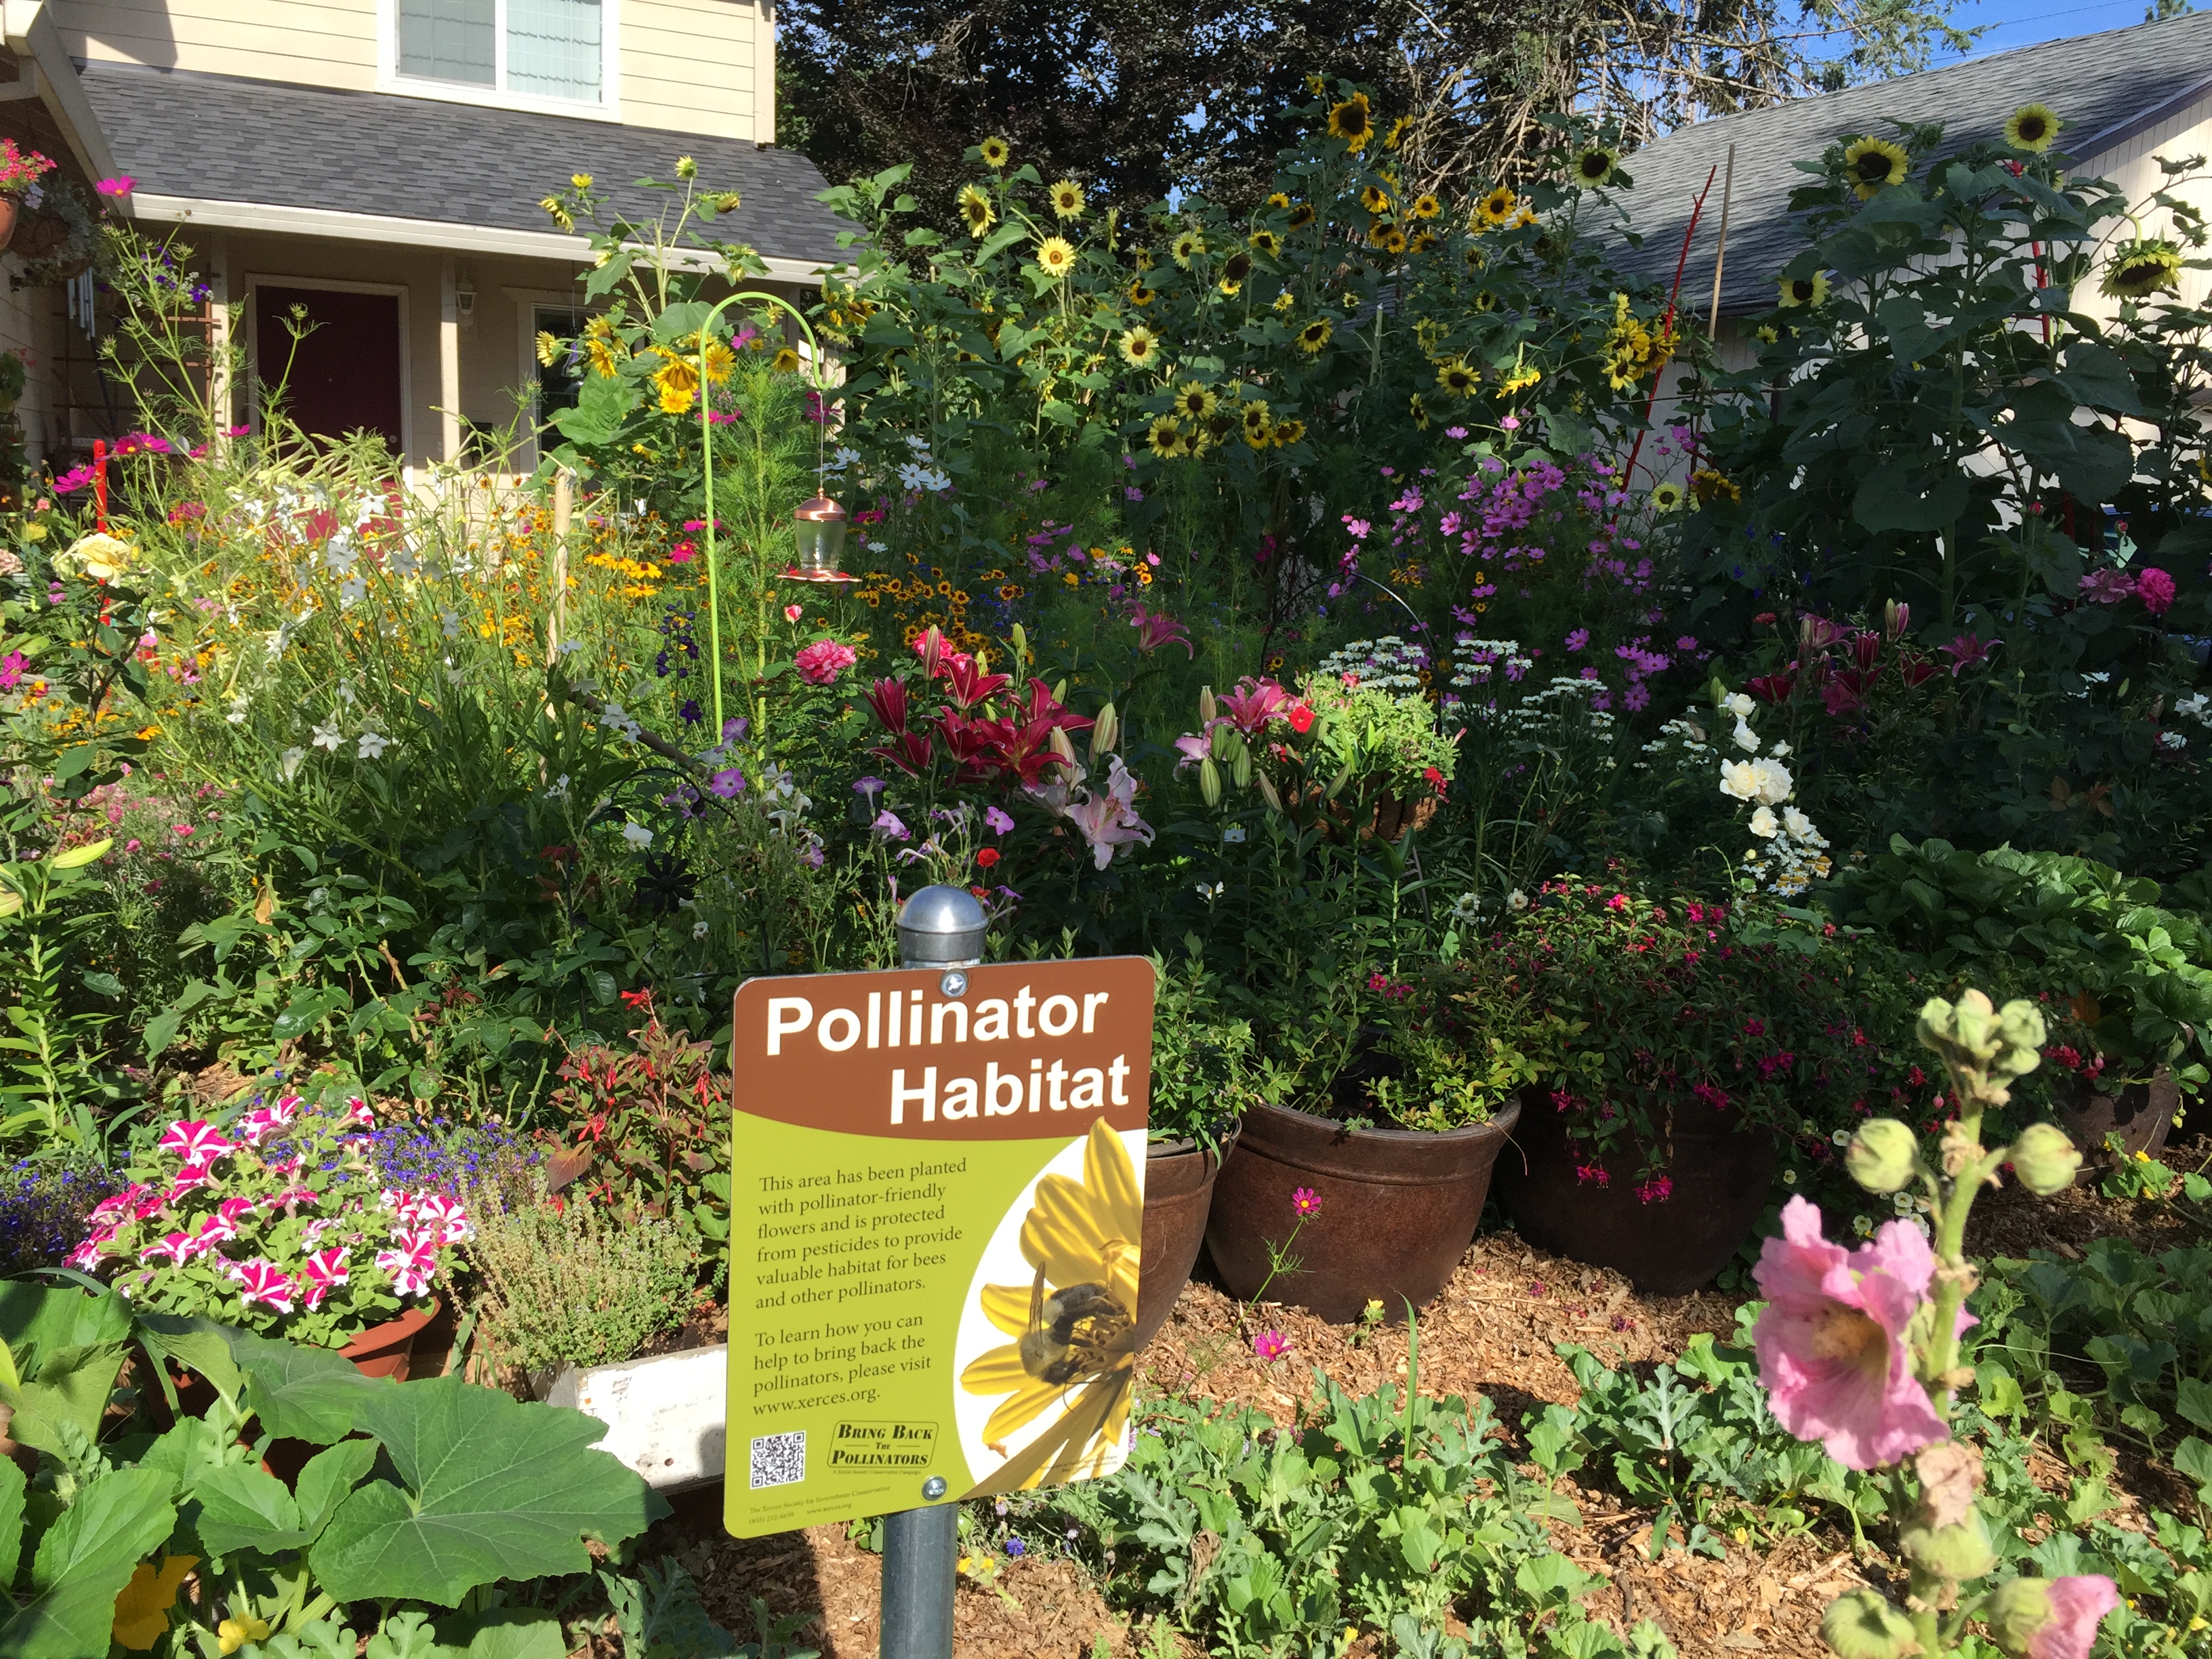 A diversity of flowers in a front yard surround a sign that says "pollinator habitat"